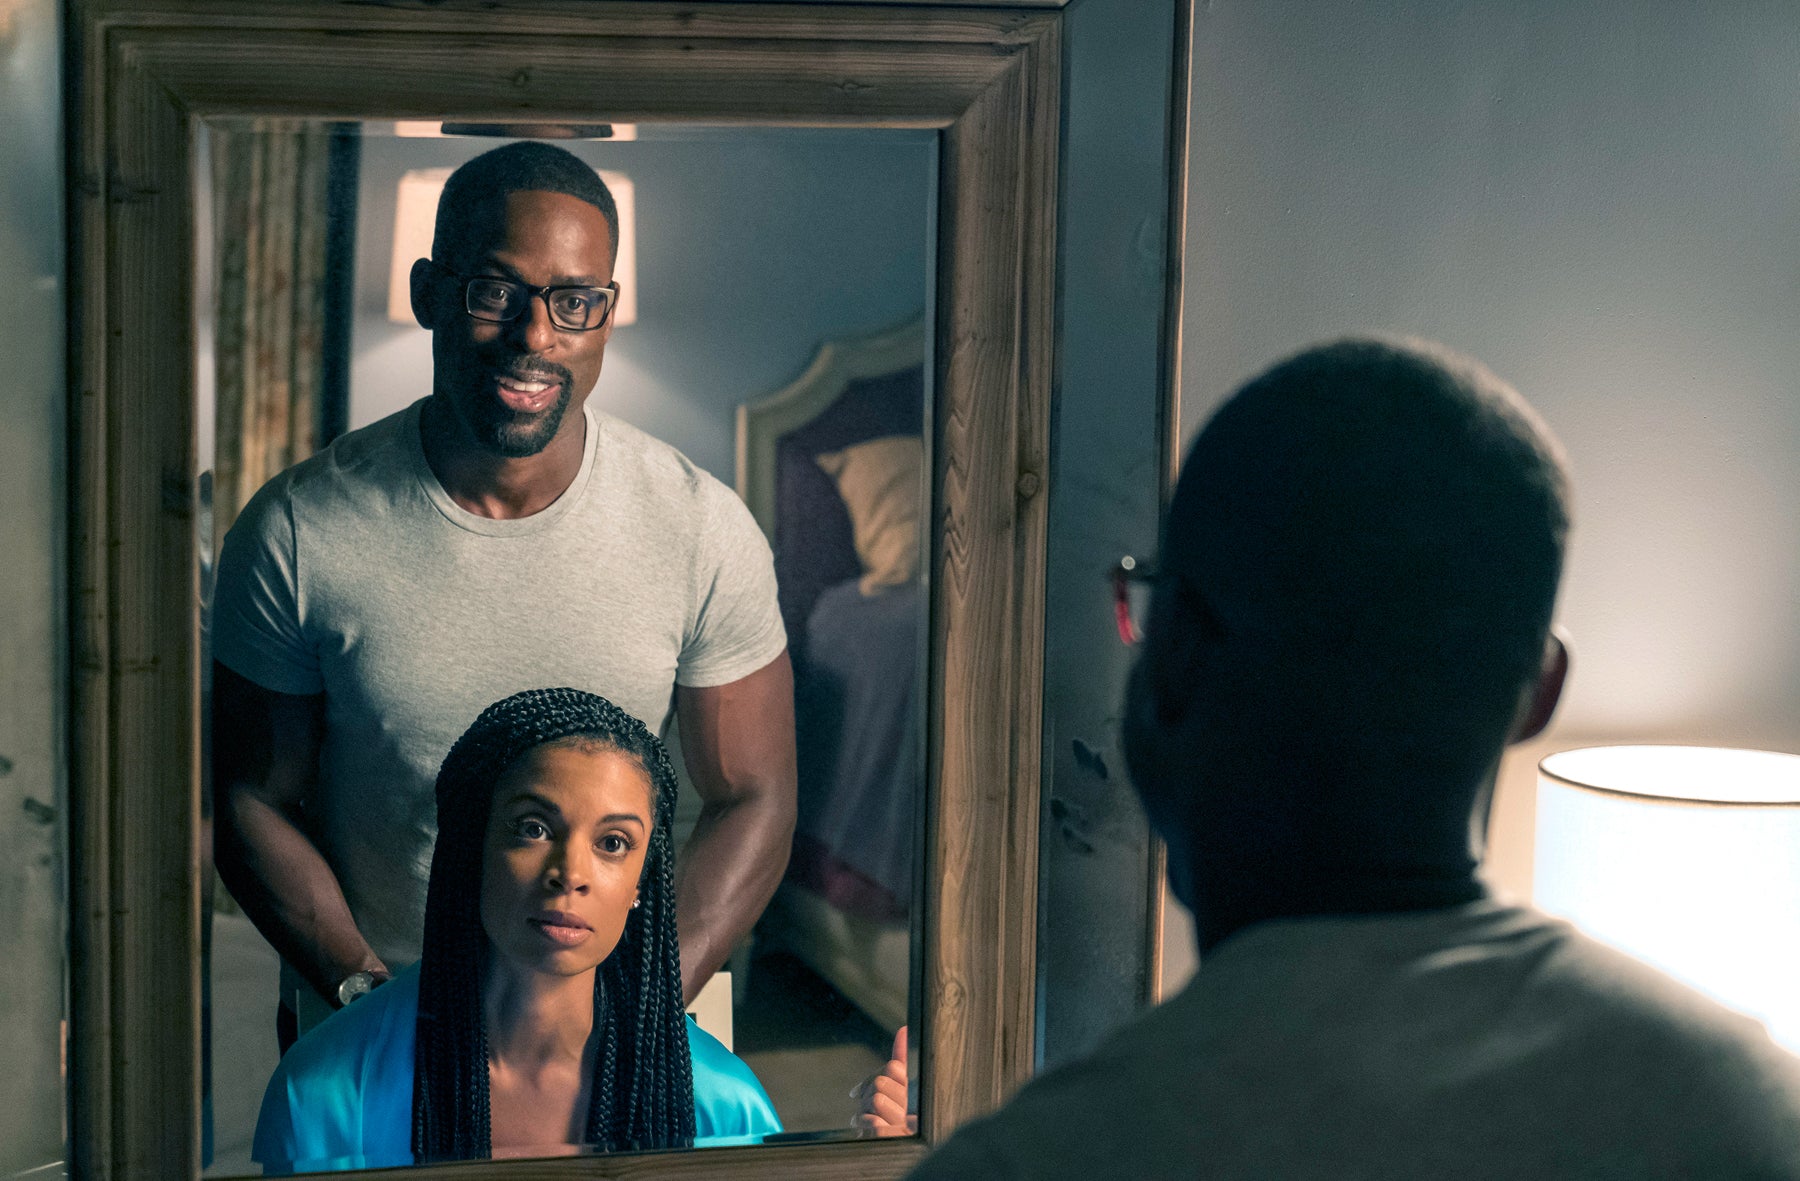 Randall Pearson (Sterling K. Brown) stands behind Beth Pearson (Susan Kelechi Watson) who sits in front of a mirror in an episode of This Is Us.